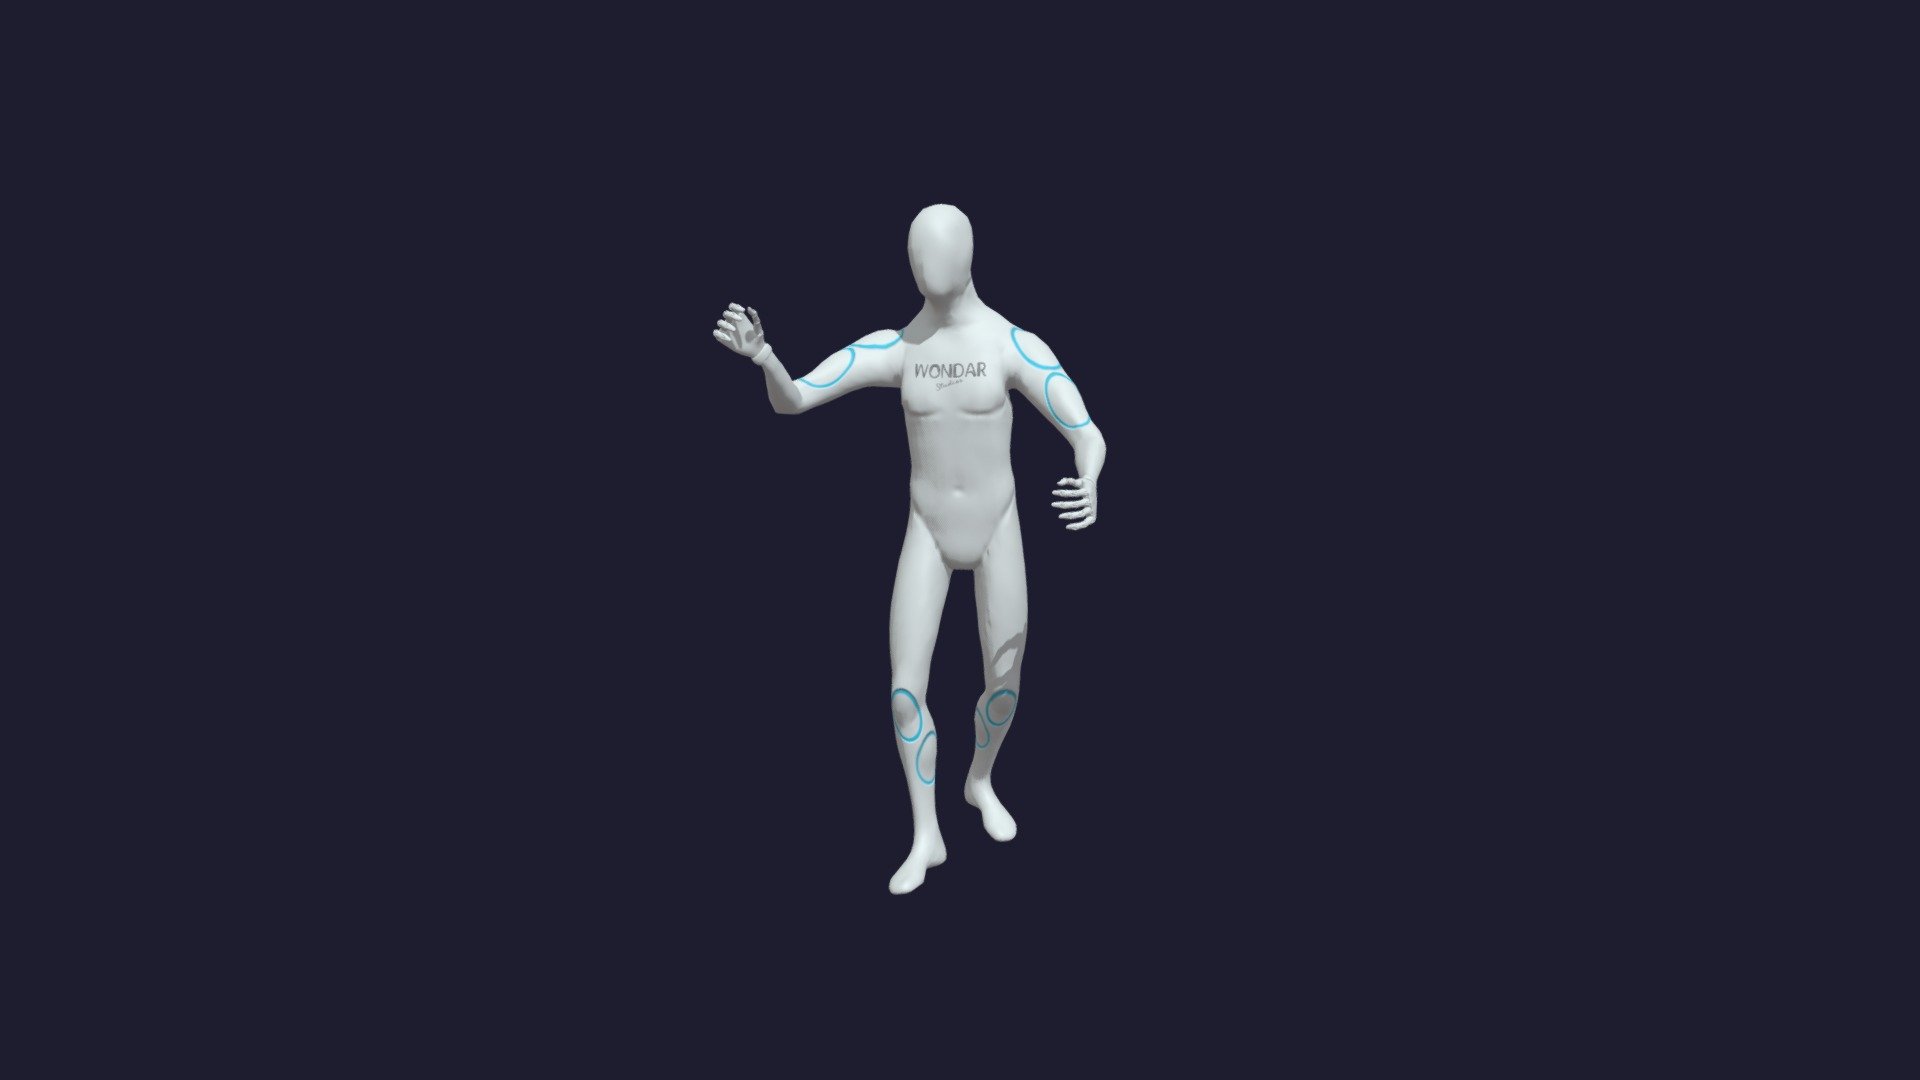 Orchestra conductor animation.
Motion capture data recorded with xsens technology and manus gloves for the hand tracking.
With the MVN Animate program, and the HD Reprocessing you can realize the highest-quality motion capture data.

Professional mocap actors create our animations, which range from simple walks to the execution of free body acrobatics motion.
Depending on your project, all recording animation may be merged to produce various sequences.

Download this motion to bring your character to life!
Duration: 9 seconds - Orchestra conductor - Buy Royalty Free 3D model by wondarstudios 3d model